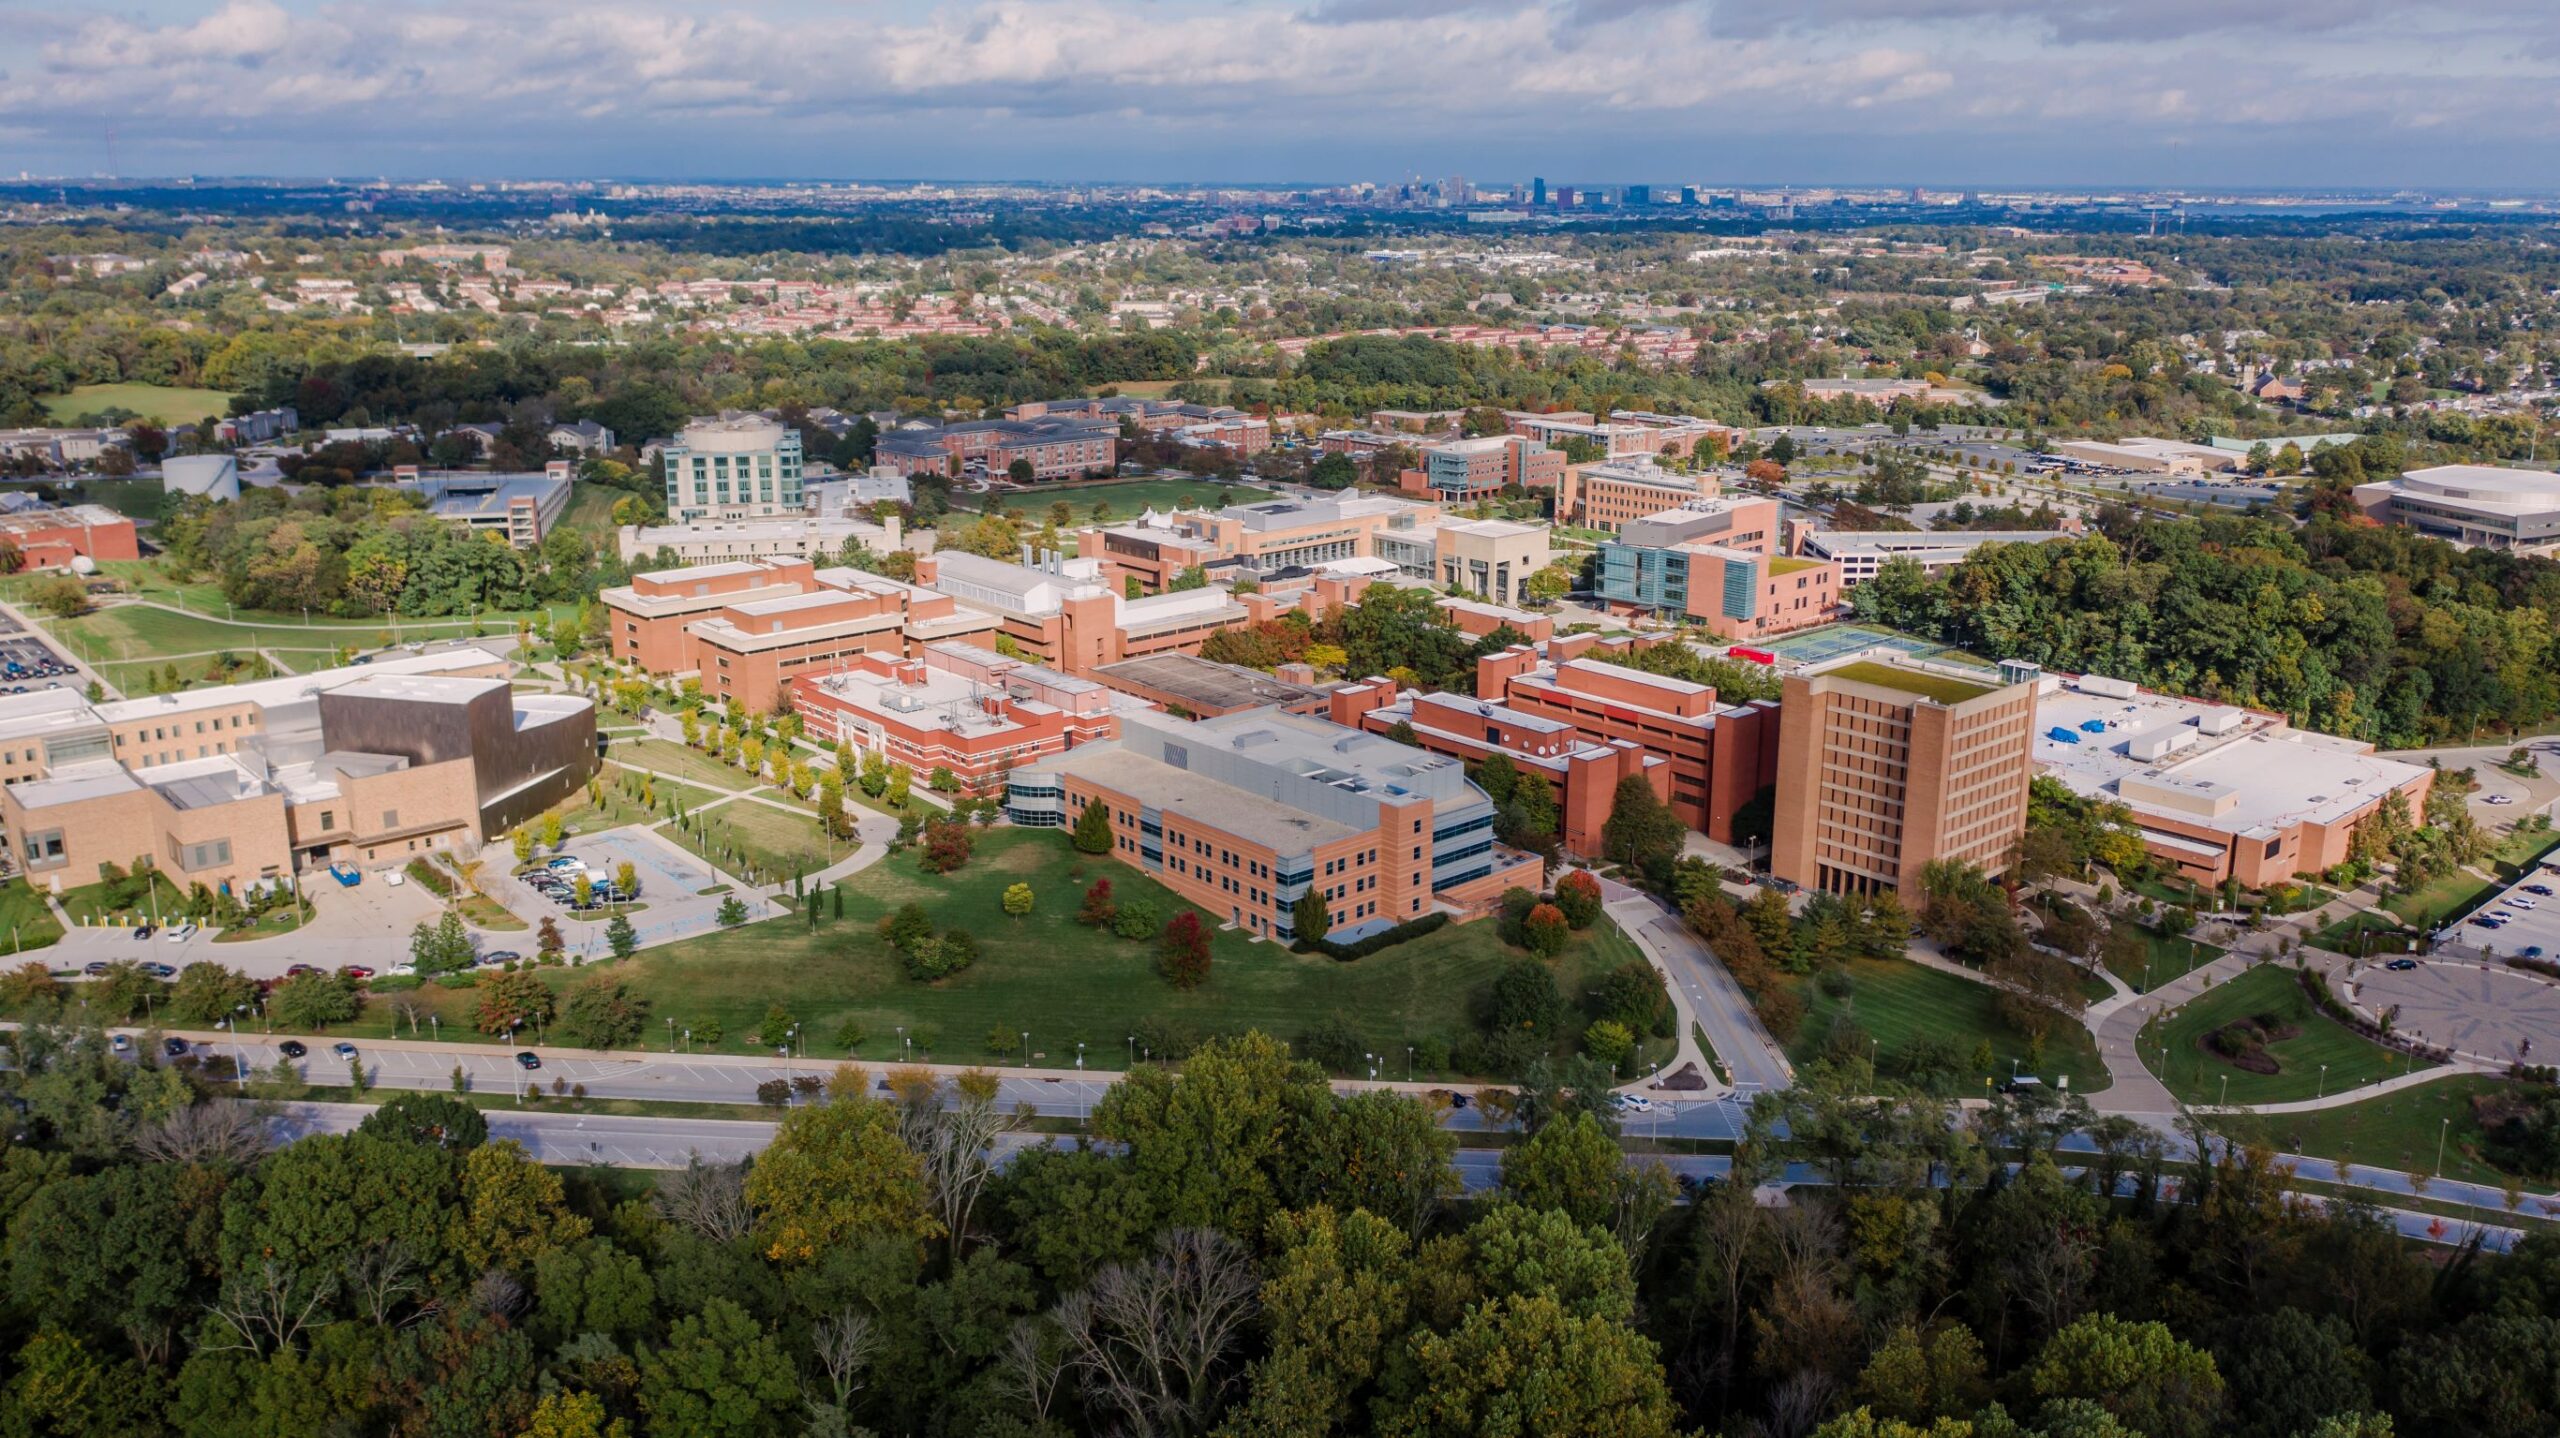 Aerial view of a university campus, with many buildings and trees